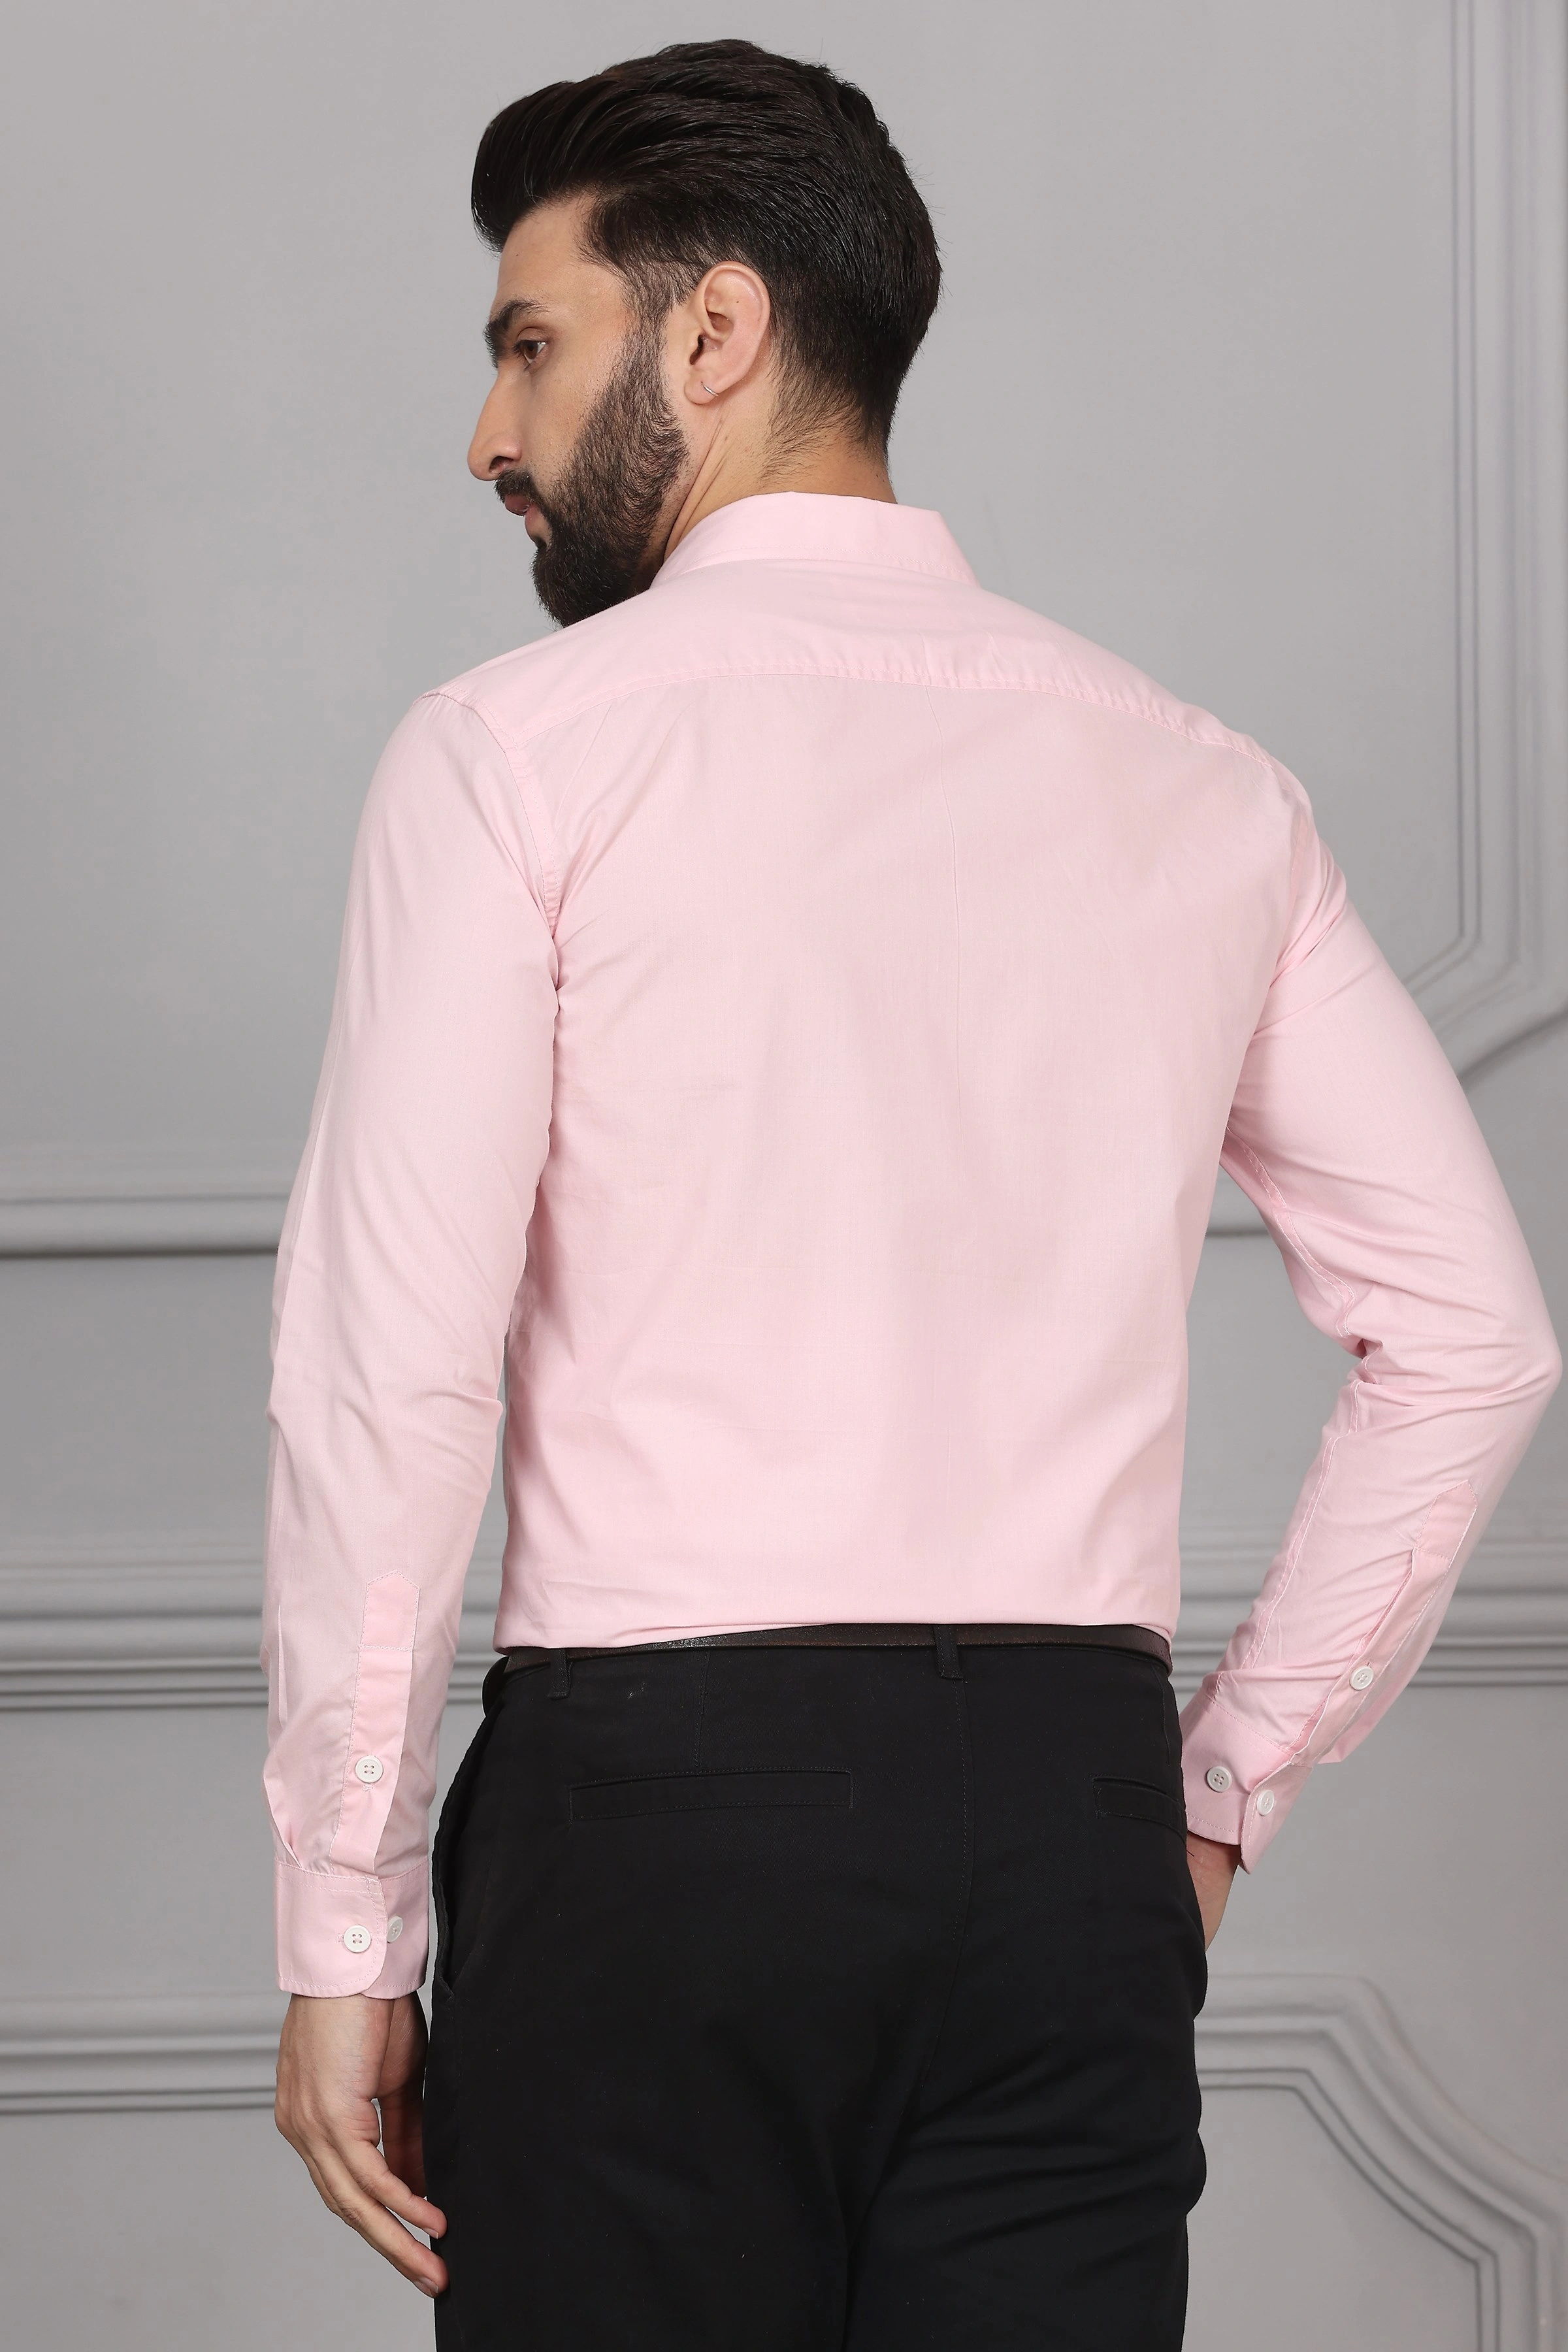 Baby Pink Formal Cotton Shirt-S-7